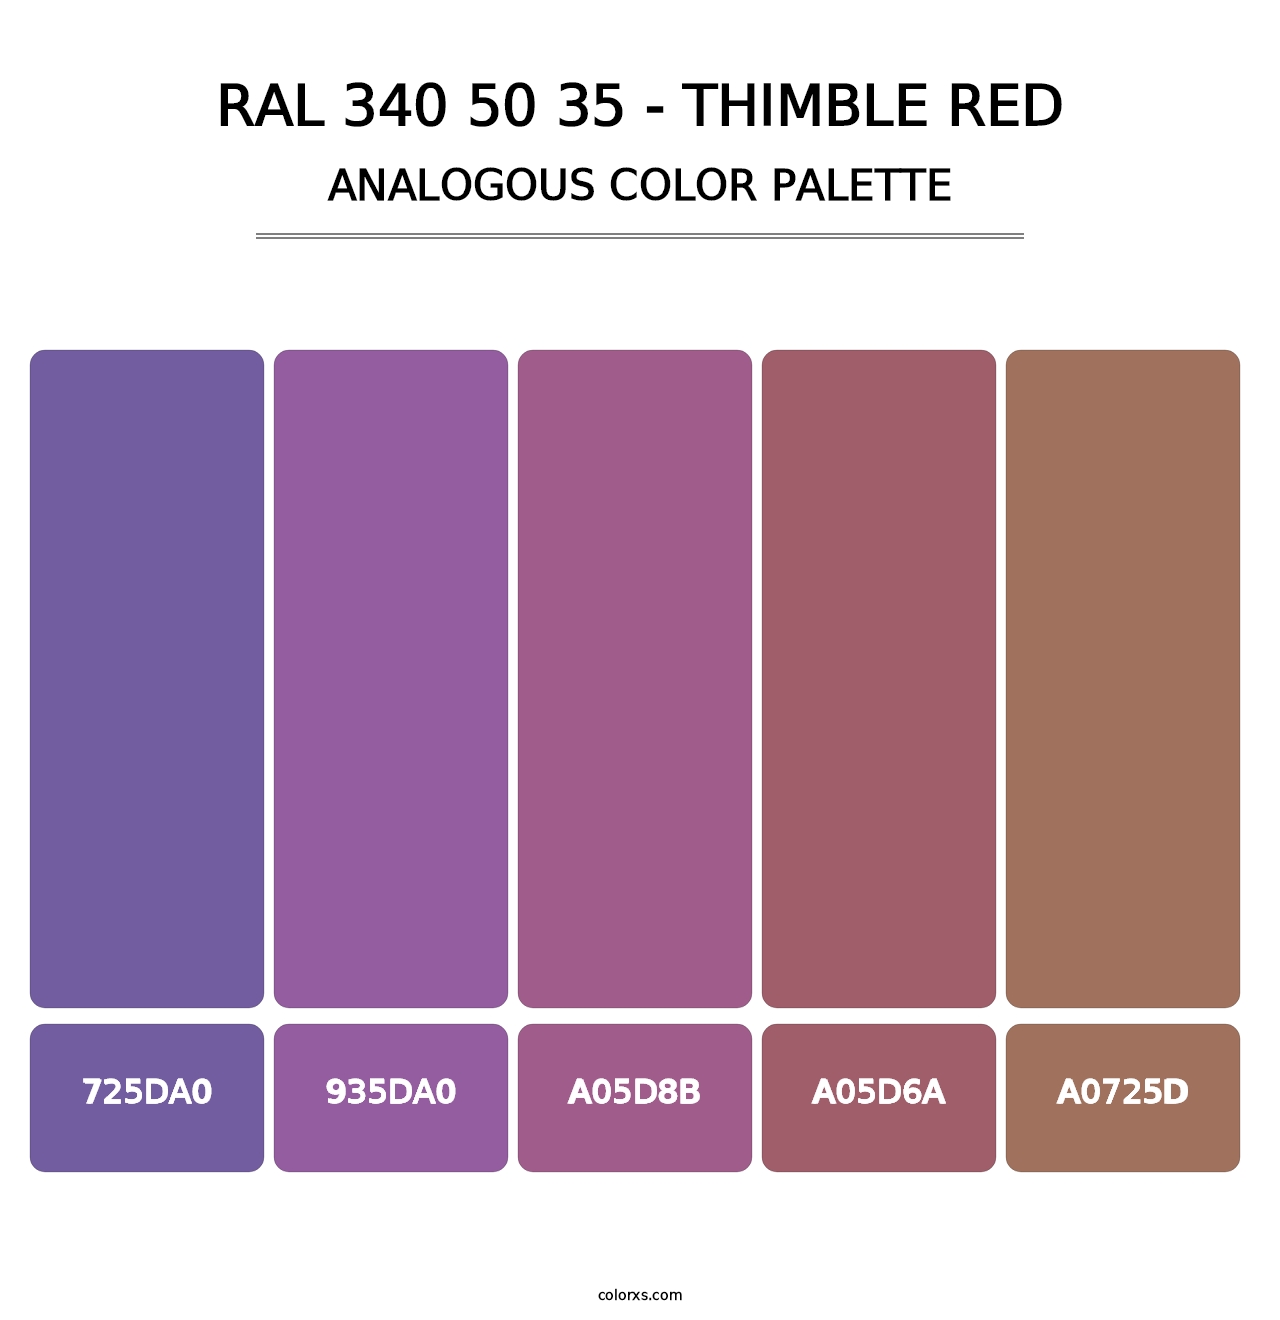 RAL 340 50 35 - Thimble Red - Analogous Color Palette